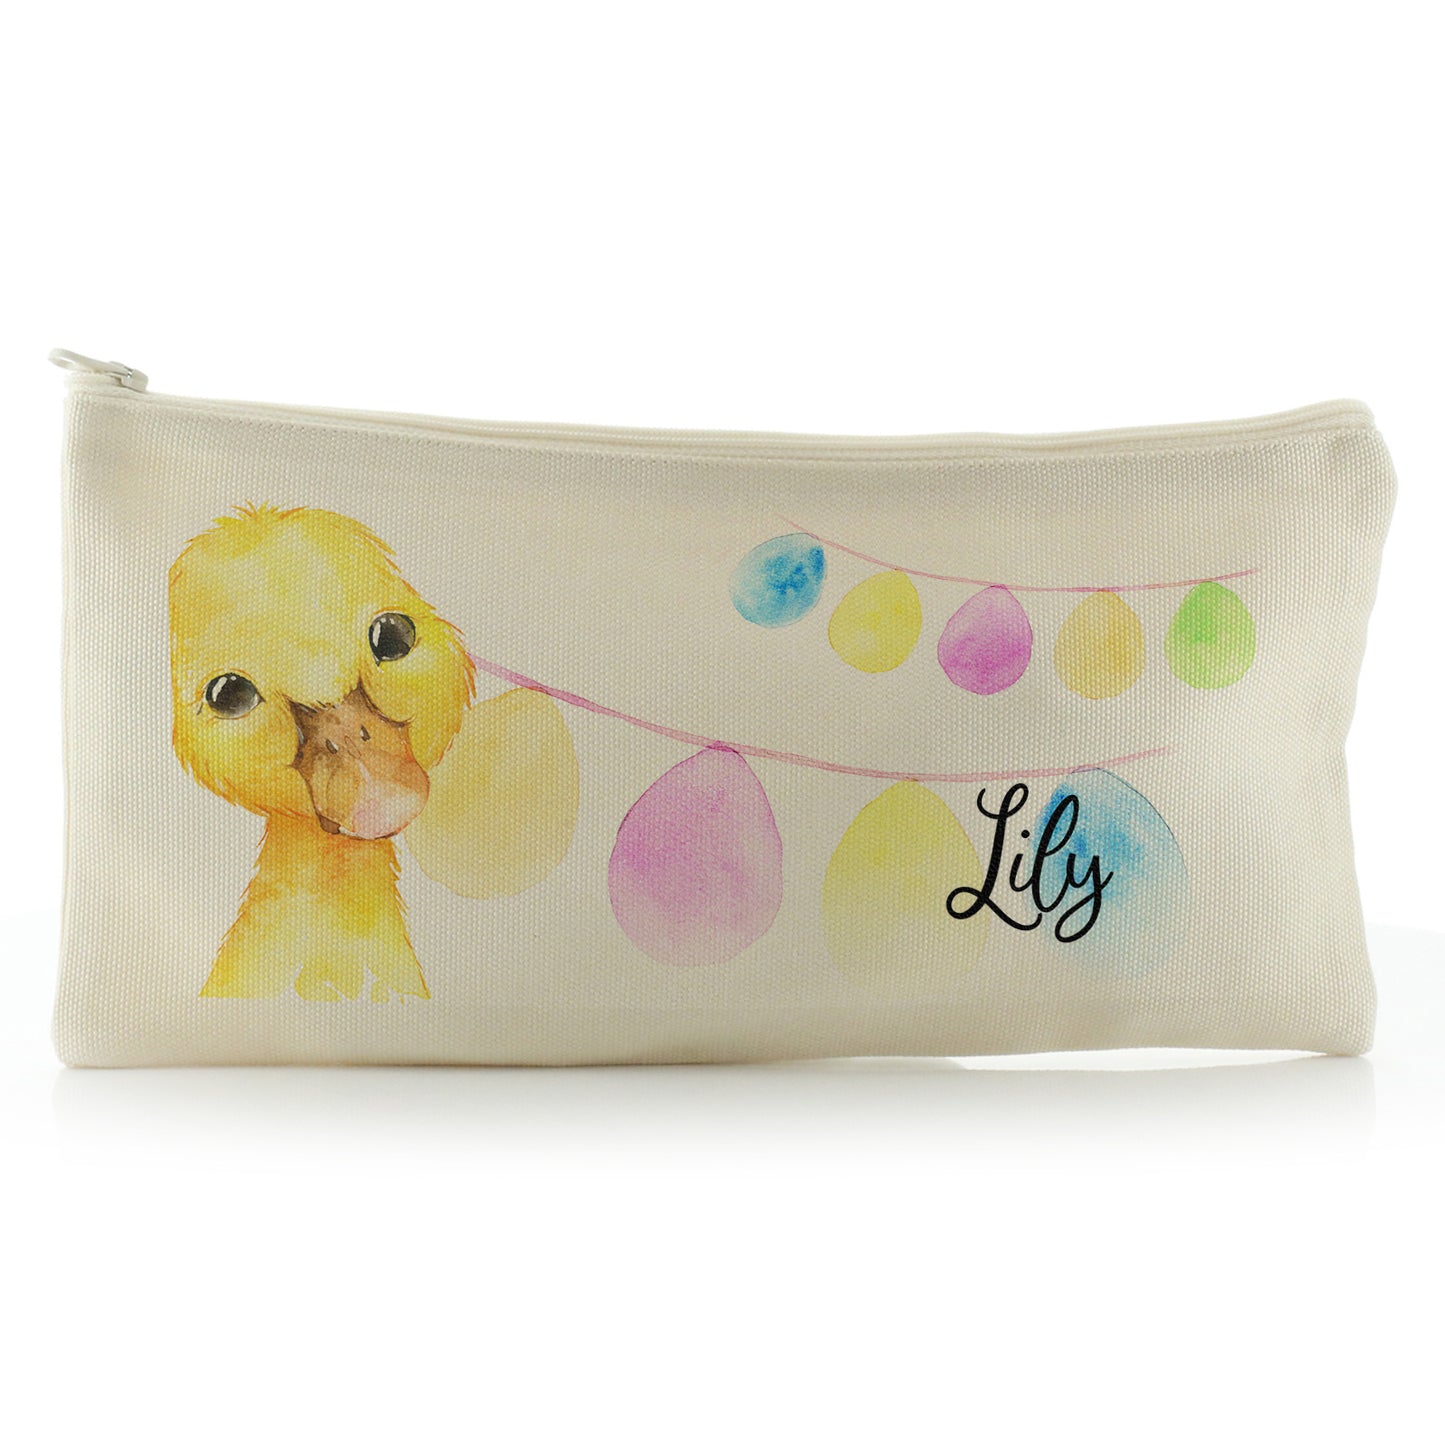 Personalised Canvas Zip Bag with Yellow Duck Multicolour Buntin and Cute Text